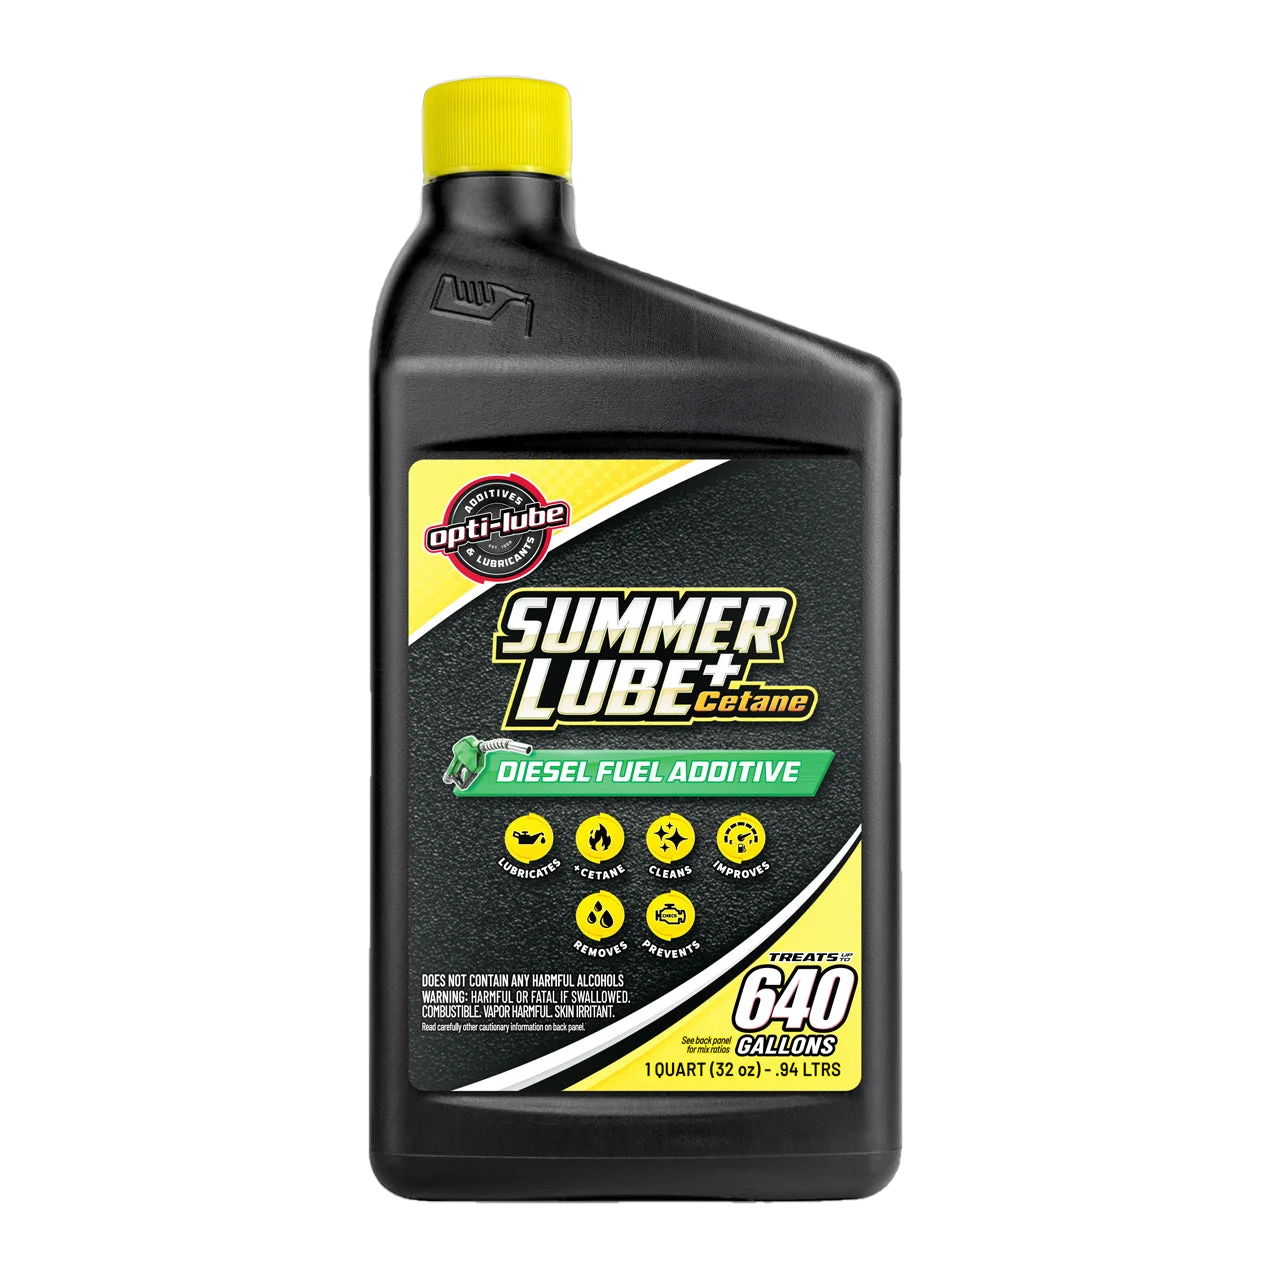 Opti-Lube Summer Lube +Cetane Diesel Fuel Additive: 1 Quart, Treats up to 640 Gallons